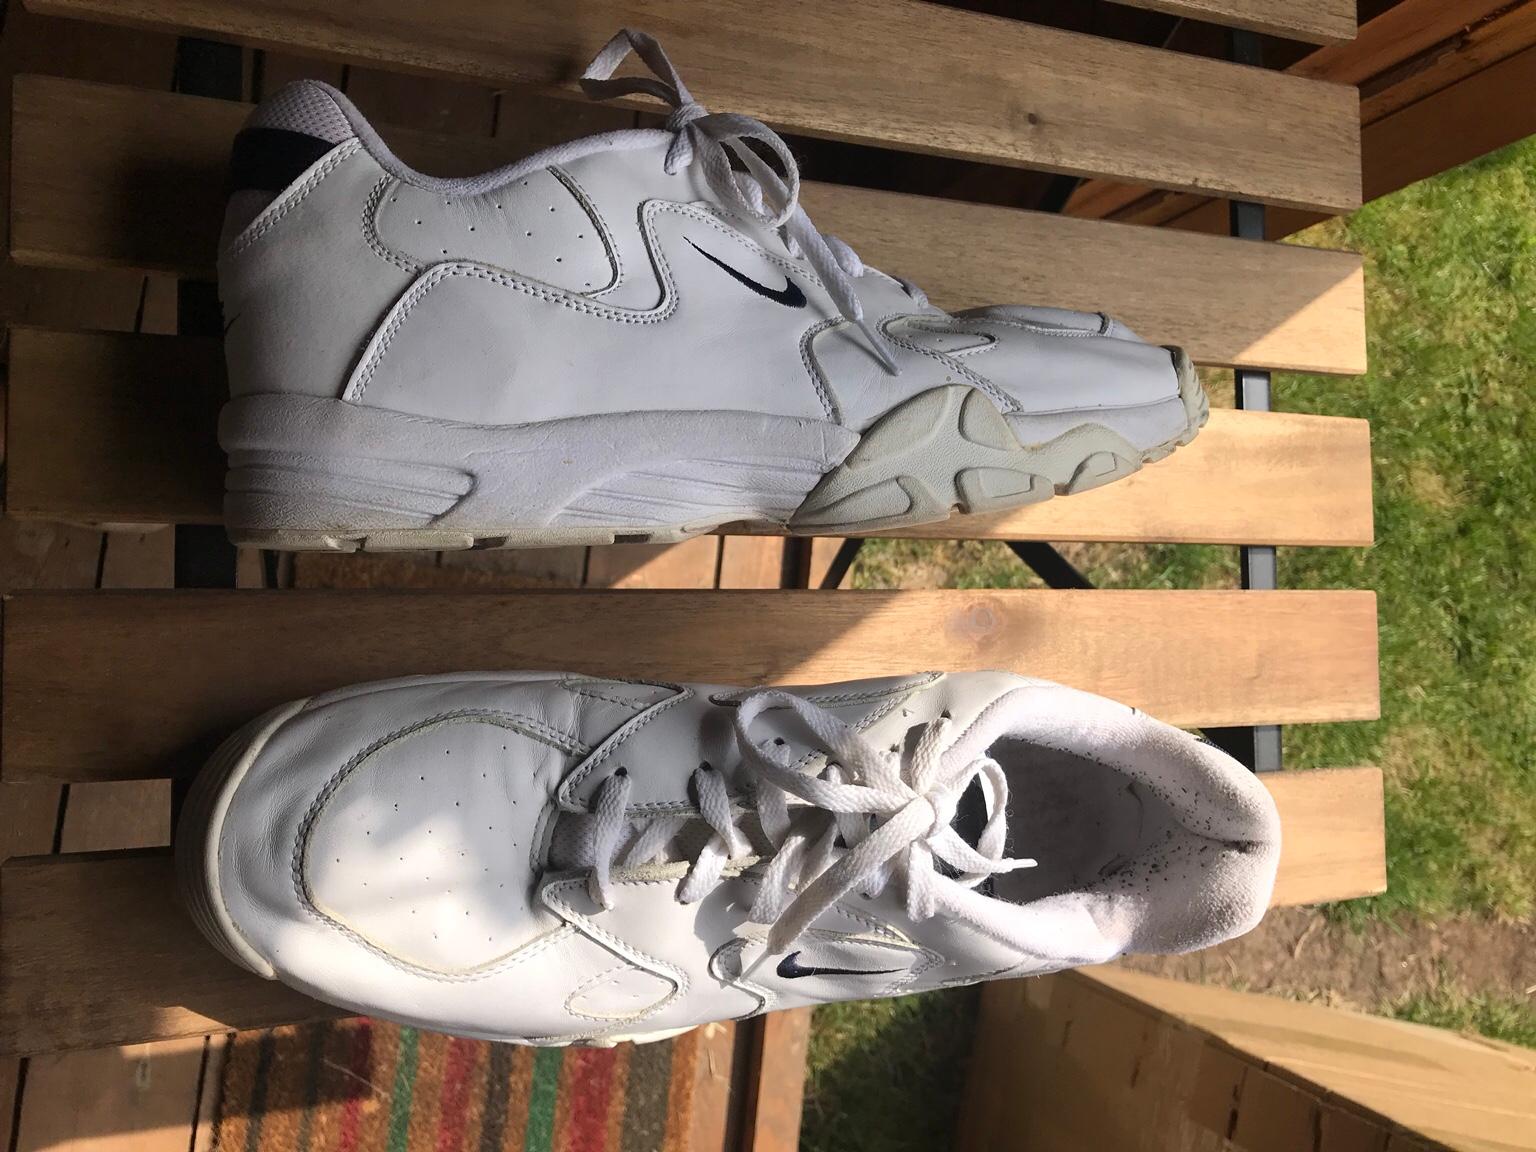 Men's size 14 Nike trainers in 